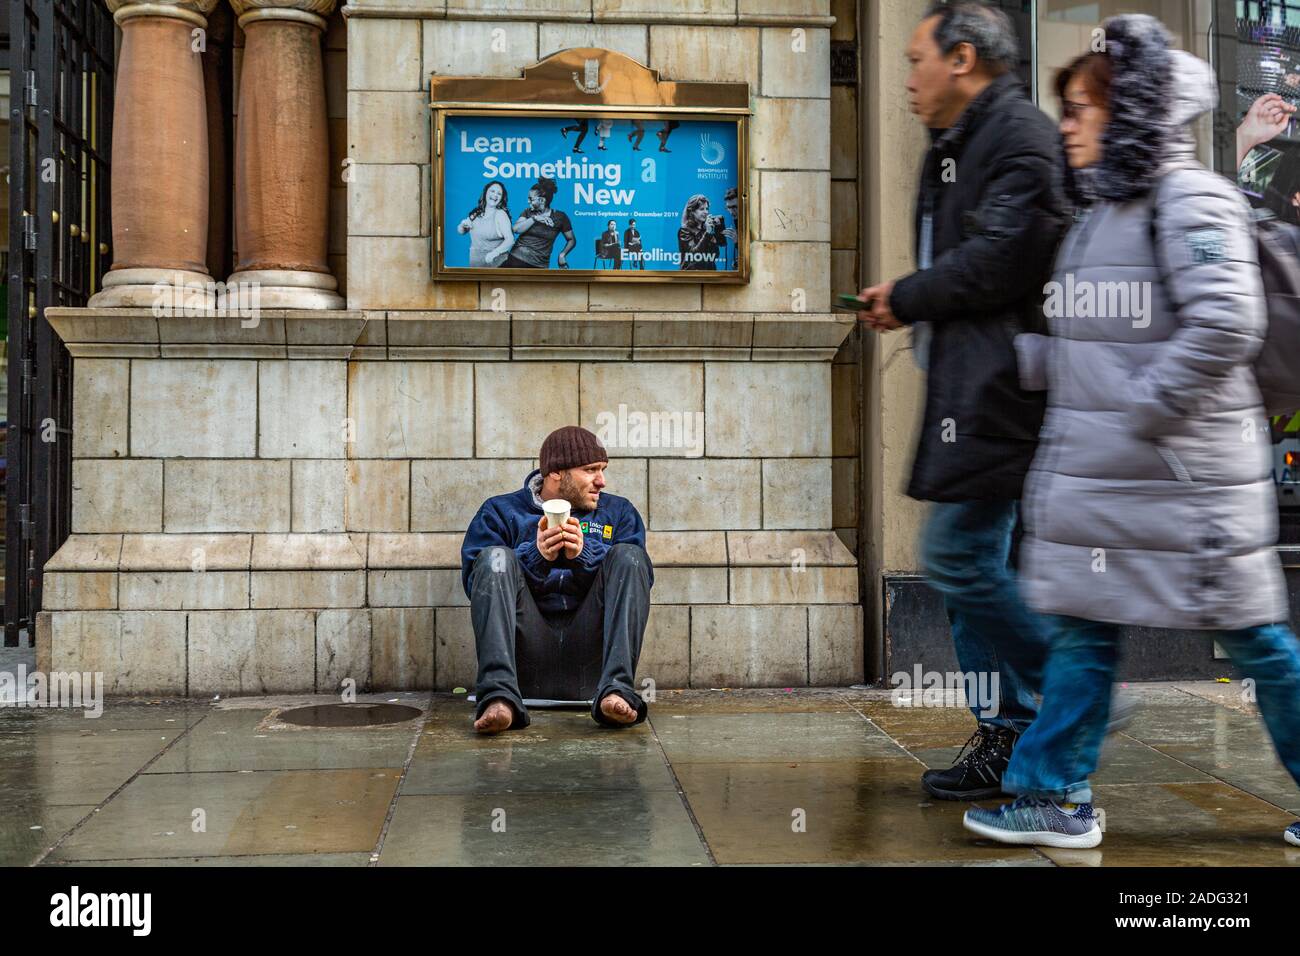 Man without shoes sitting down begging for money in winter, as people rush pass without caring, close to Liverpool Street station London England UK Stock Photo